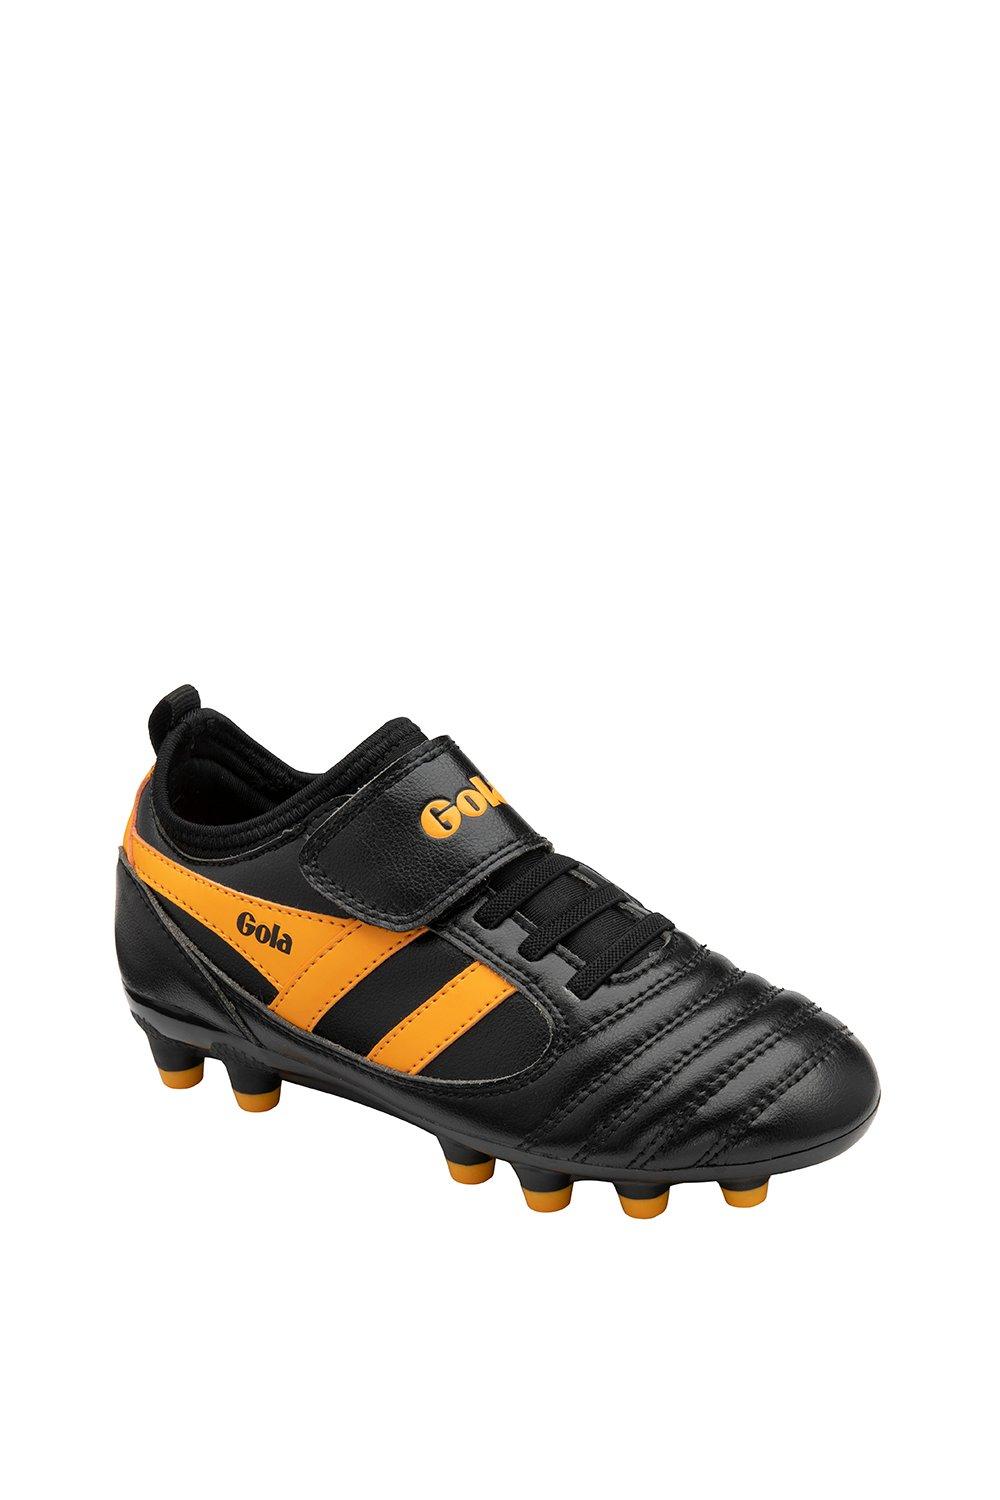 ’Ceptor MLD QF’ Football Boots